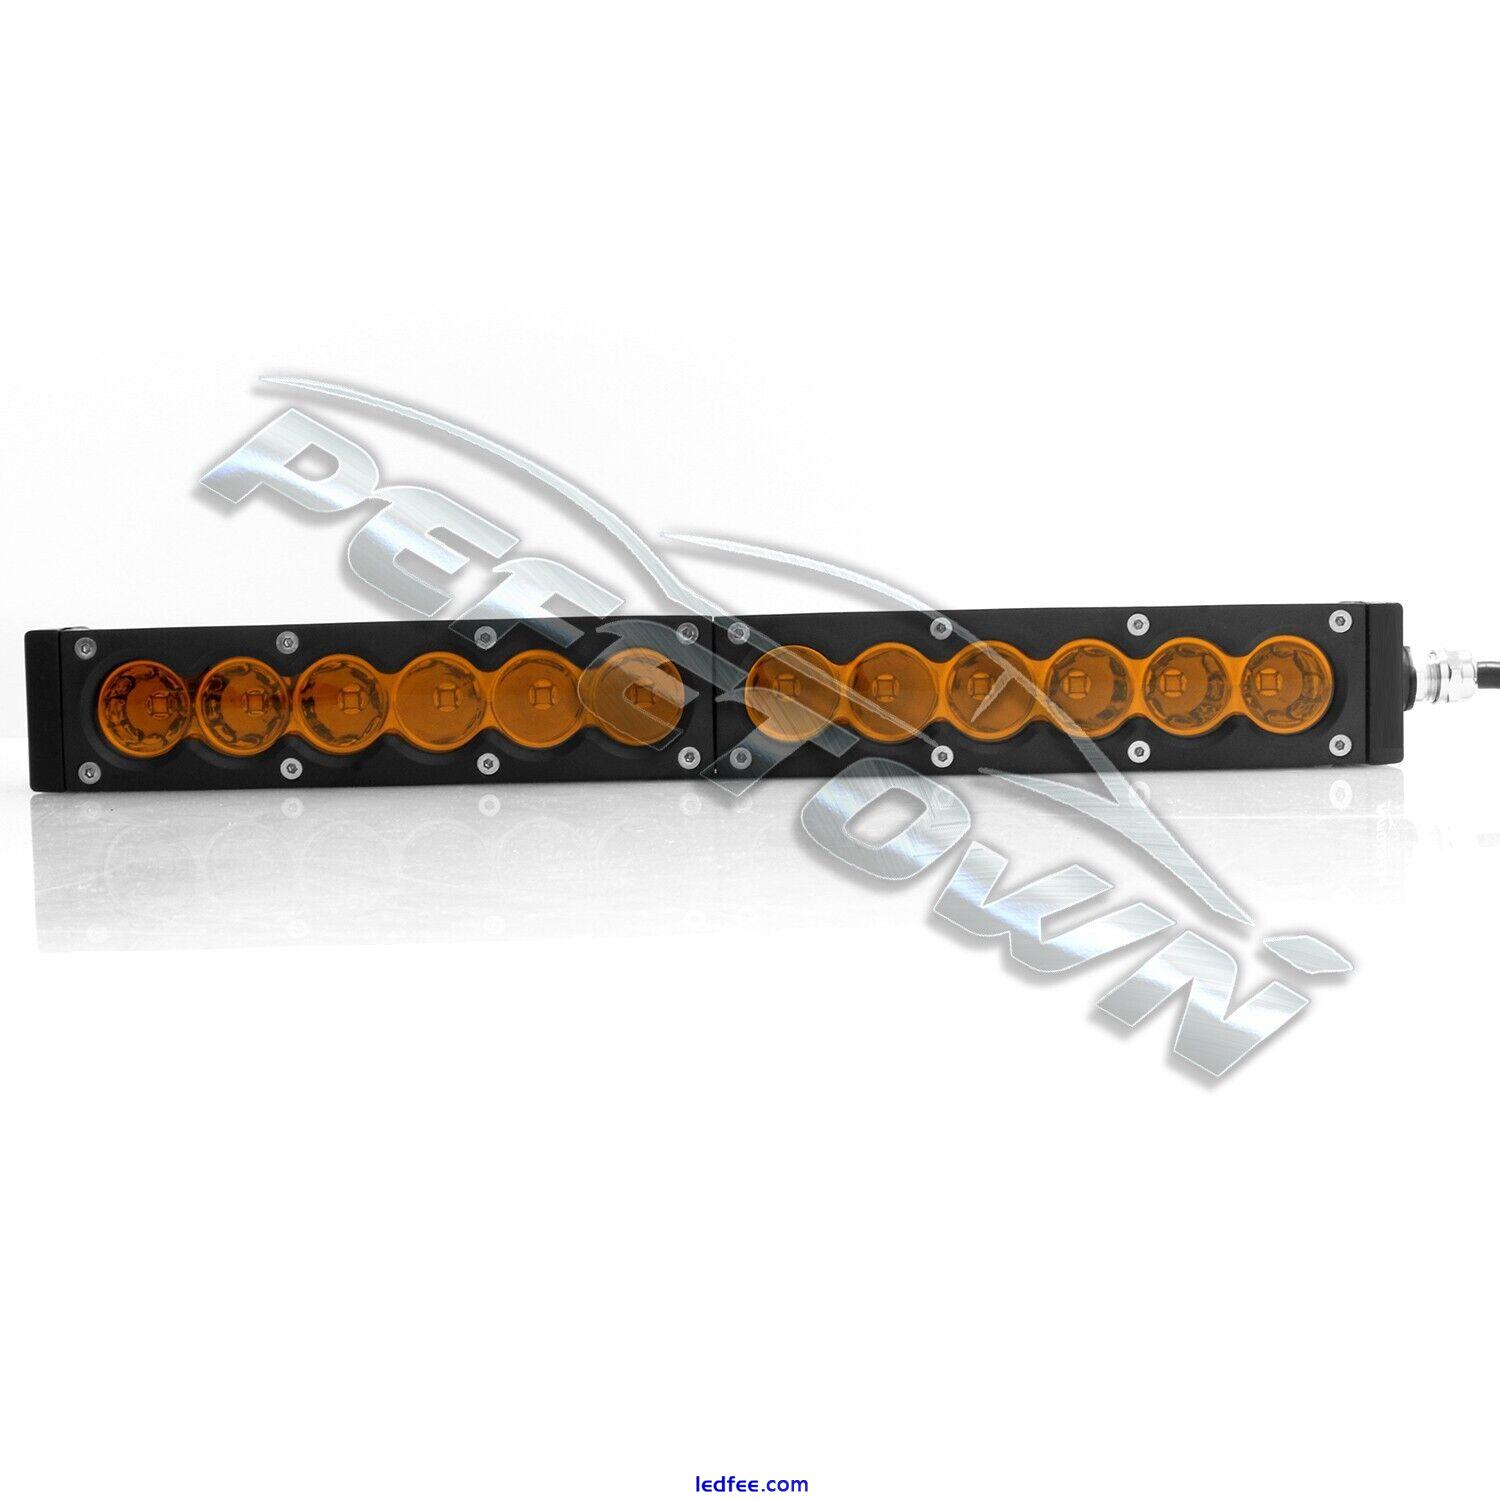 13Inch LED Work Light Bar Spot Offroad Boat SUV 4WD Truck Fog Driving Lamp Amber 5 